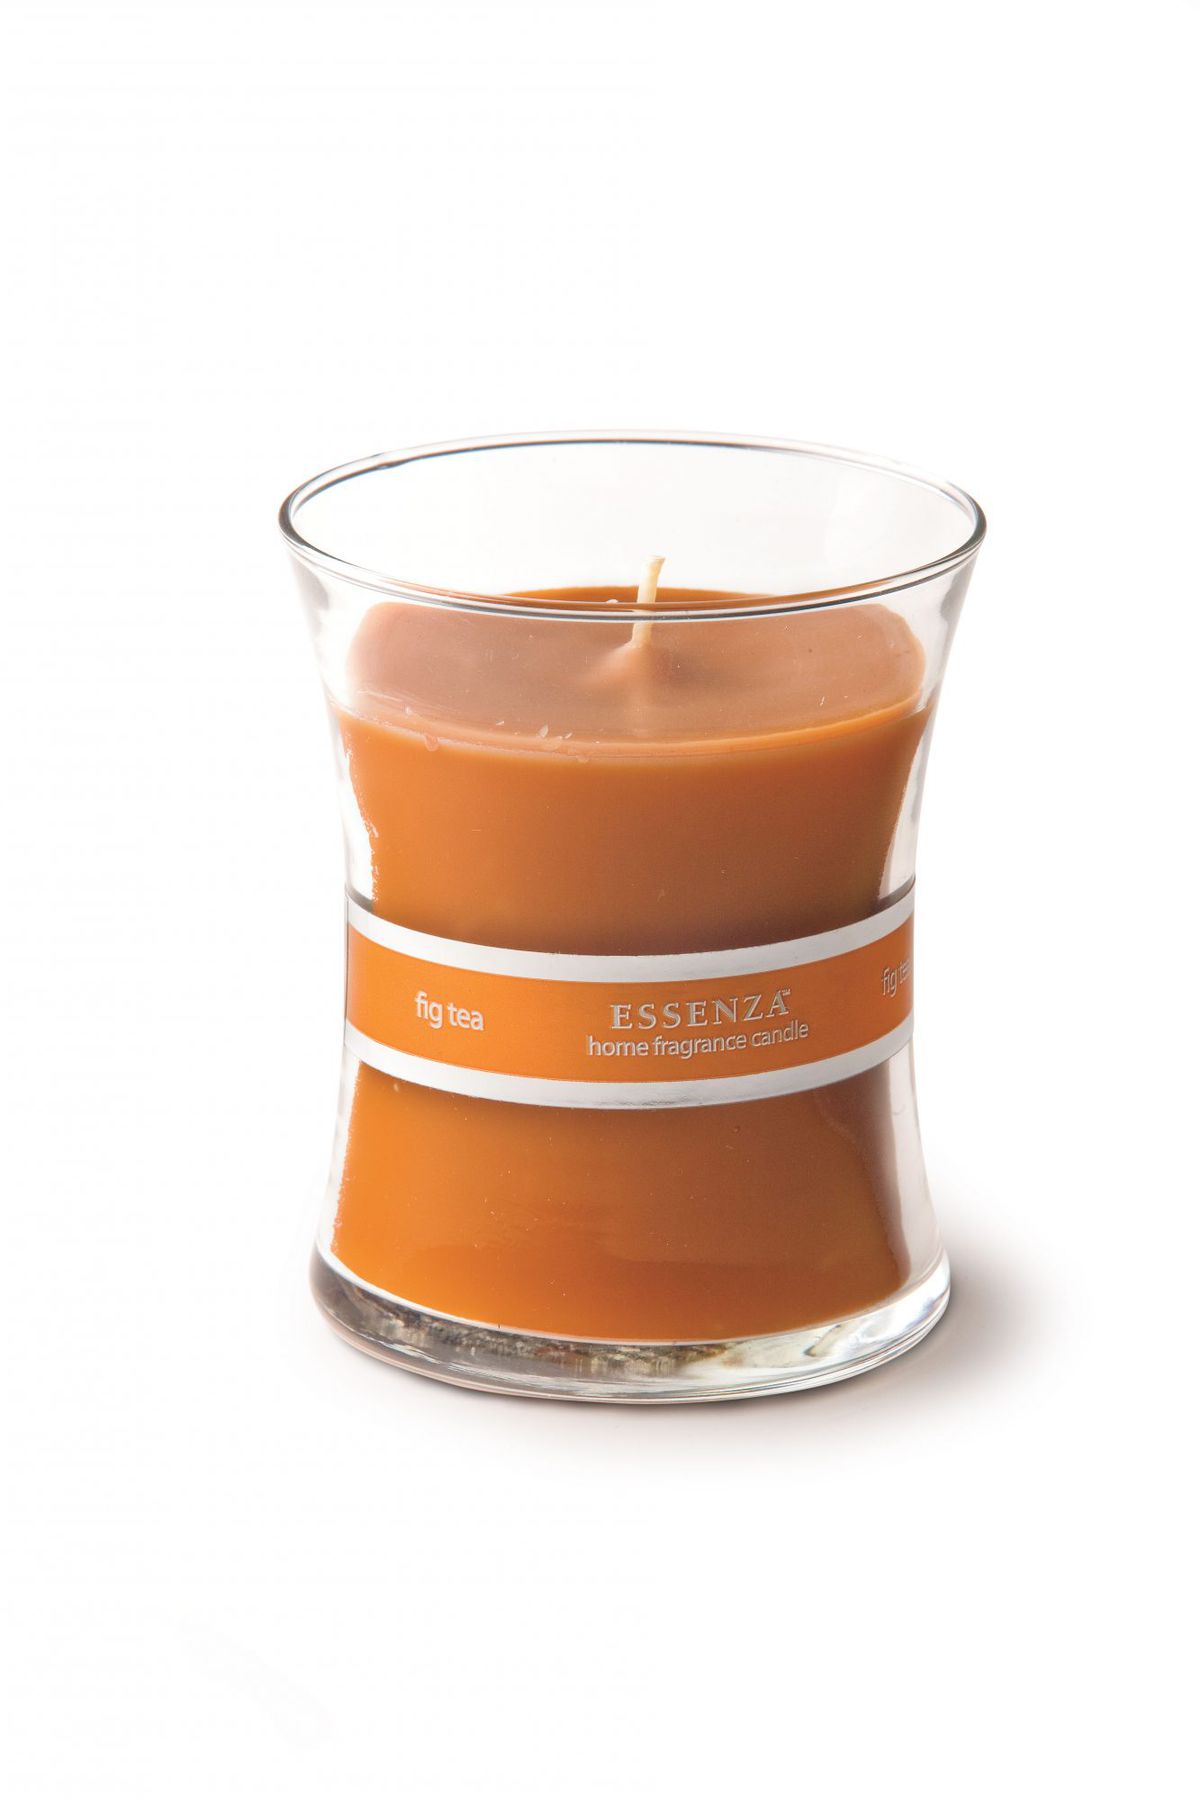 Great Gifts on a Budget: Hour Glass Candle